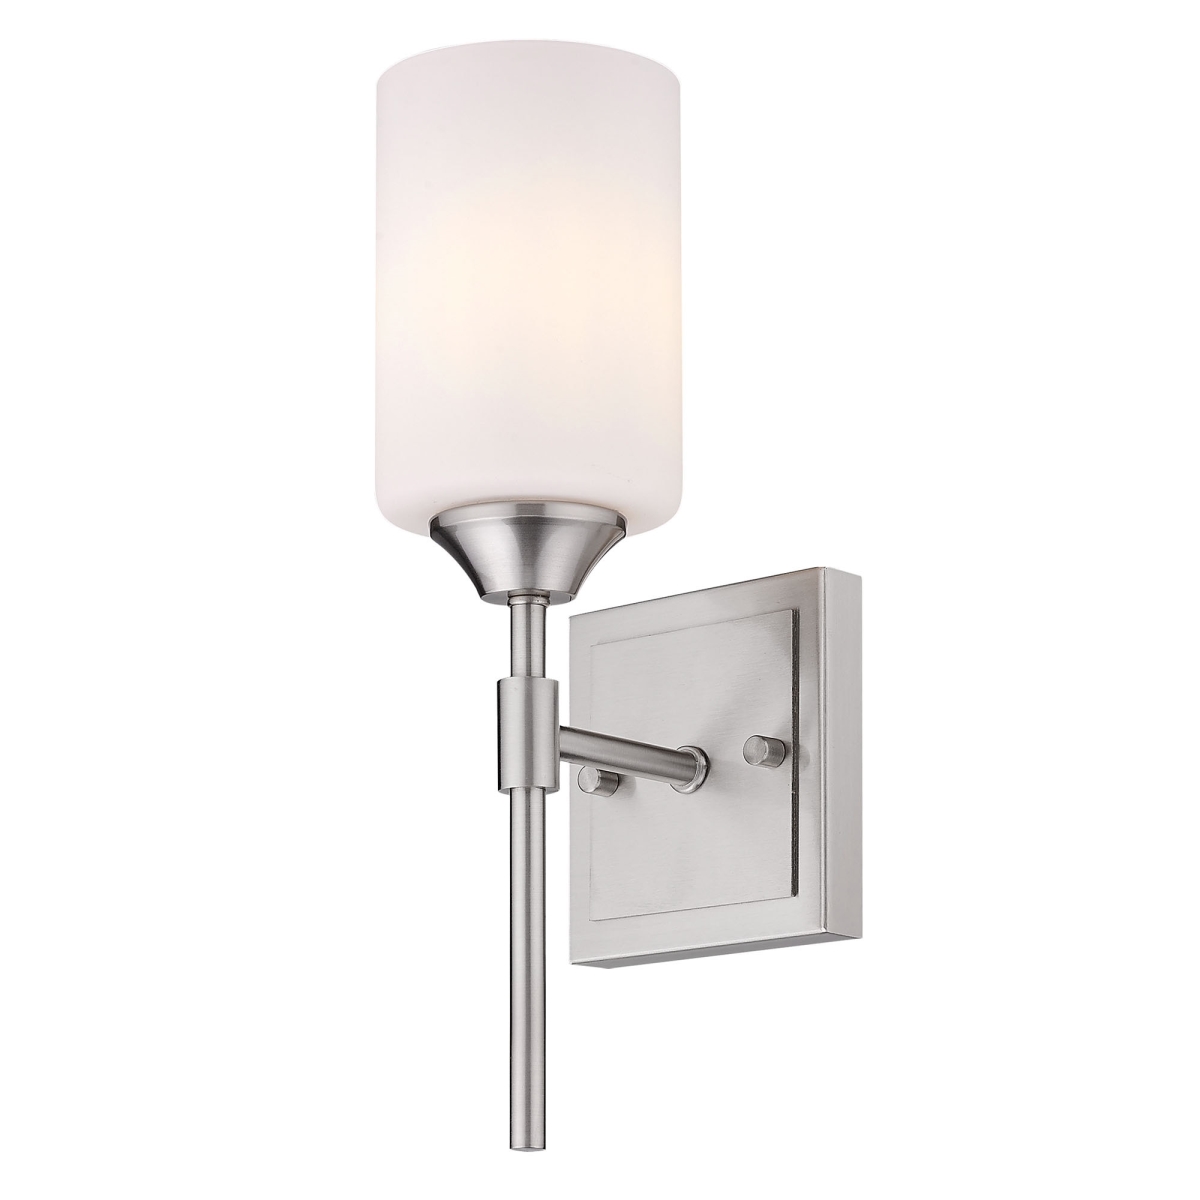 2120-ba1 Pw-cyl-op Ormond 1 Light Bath Vanity In Pewter With Cylindrical Opal Glass Shade